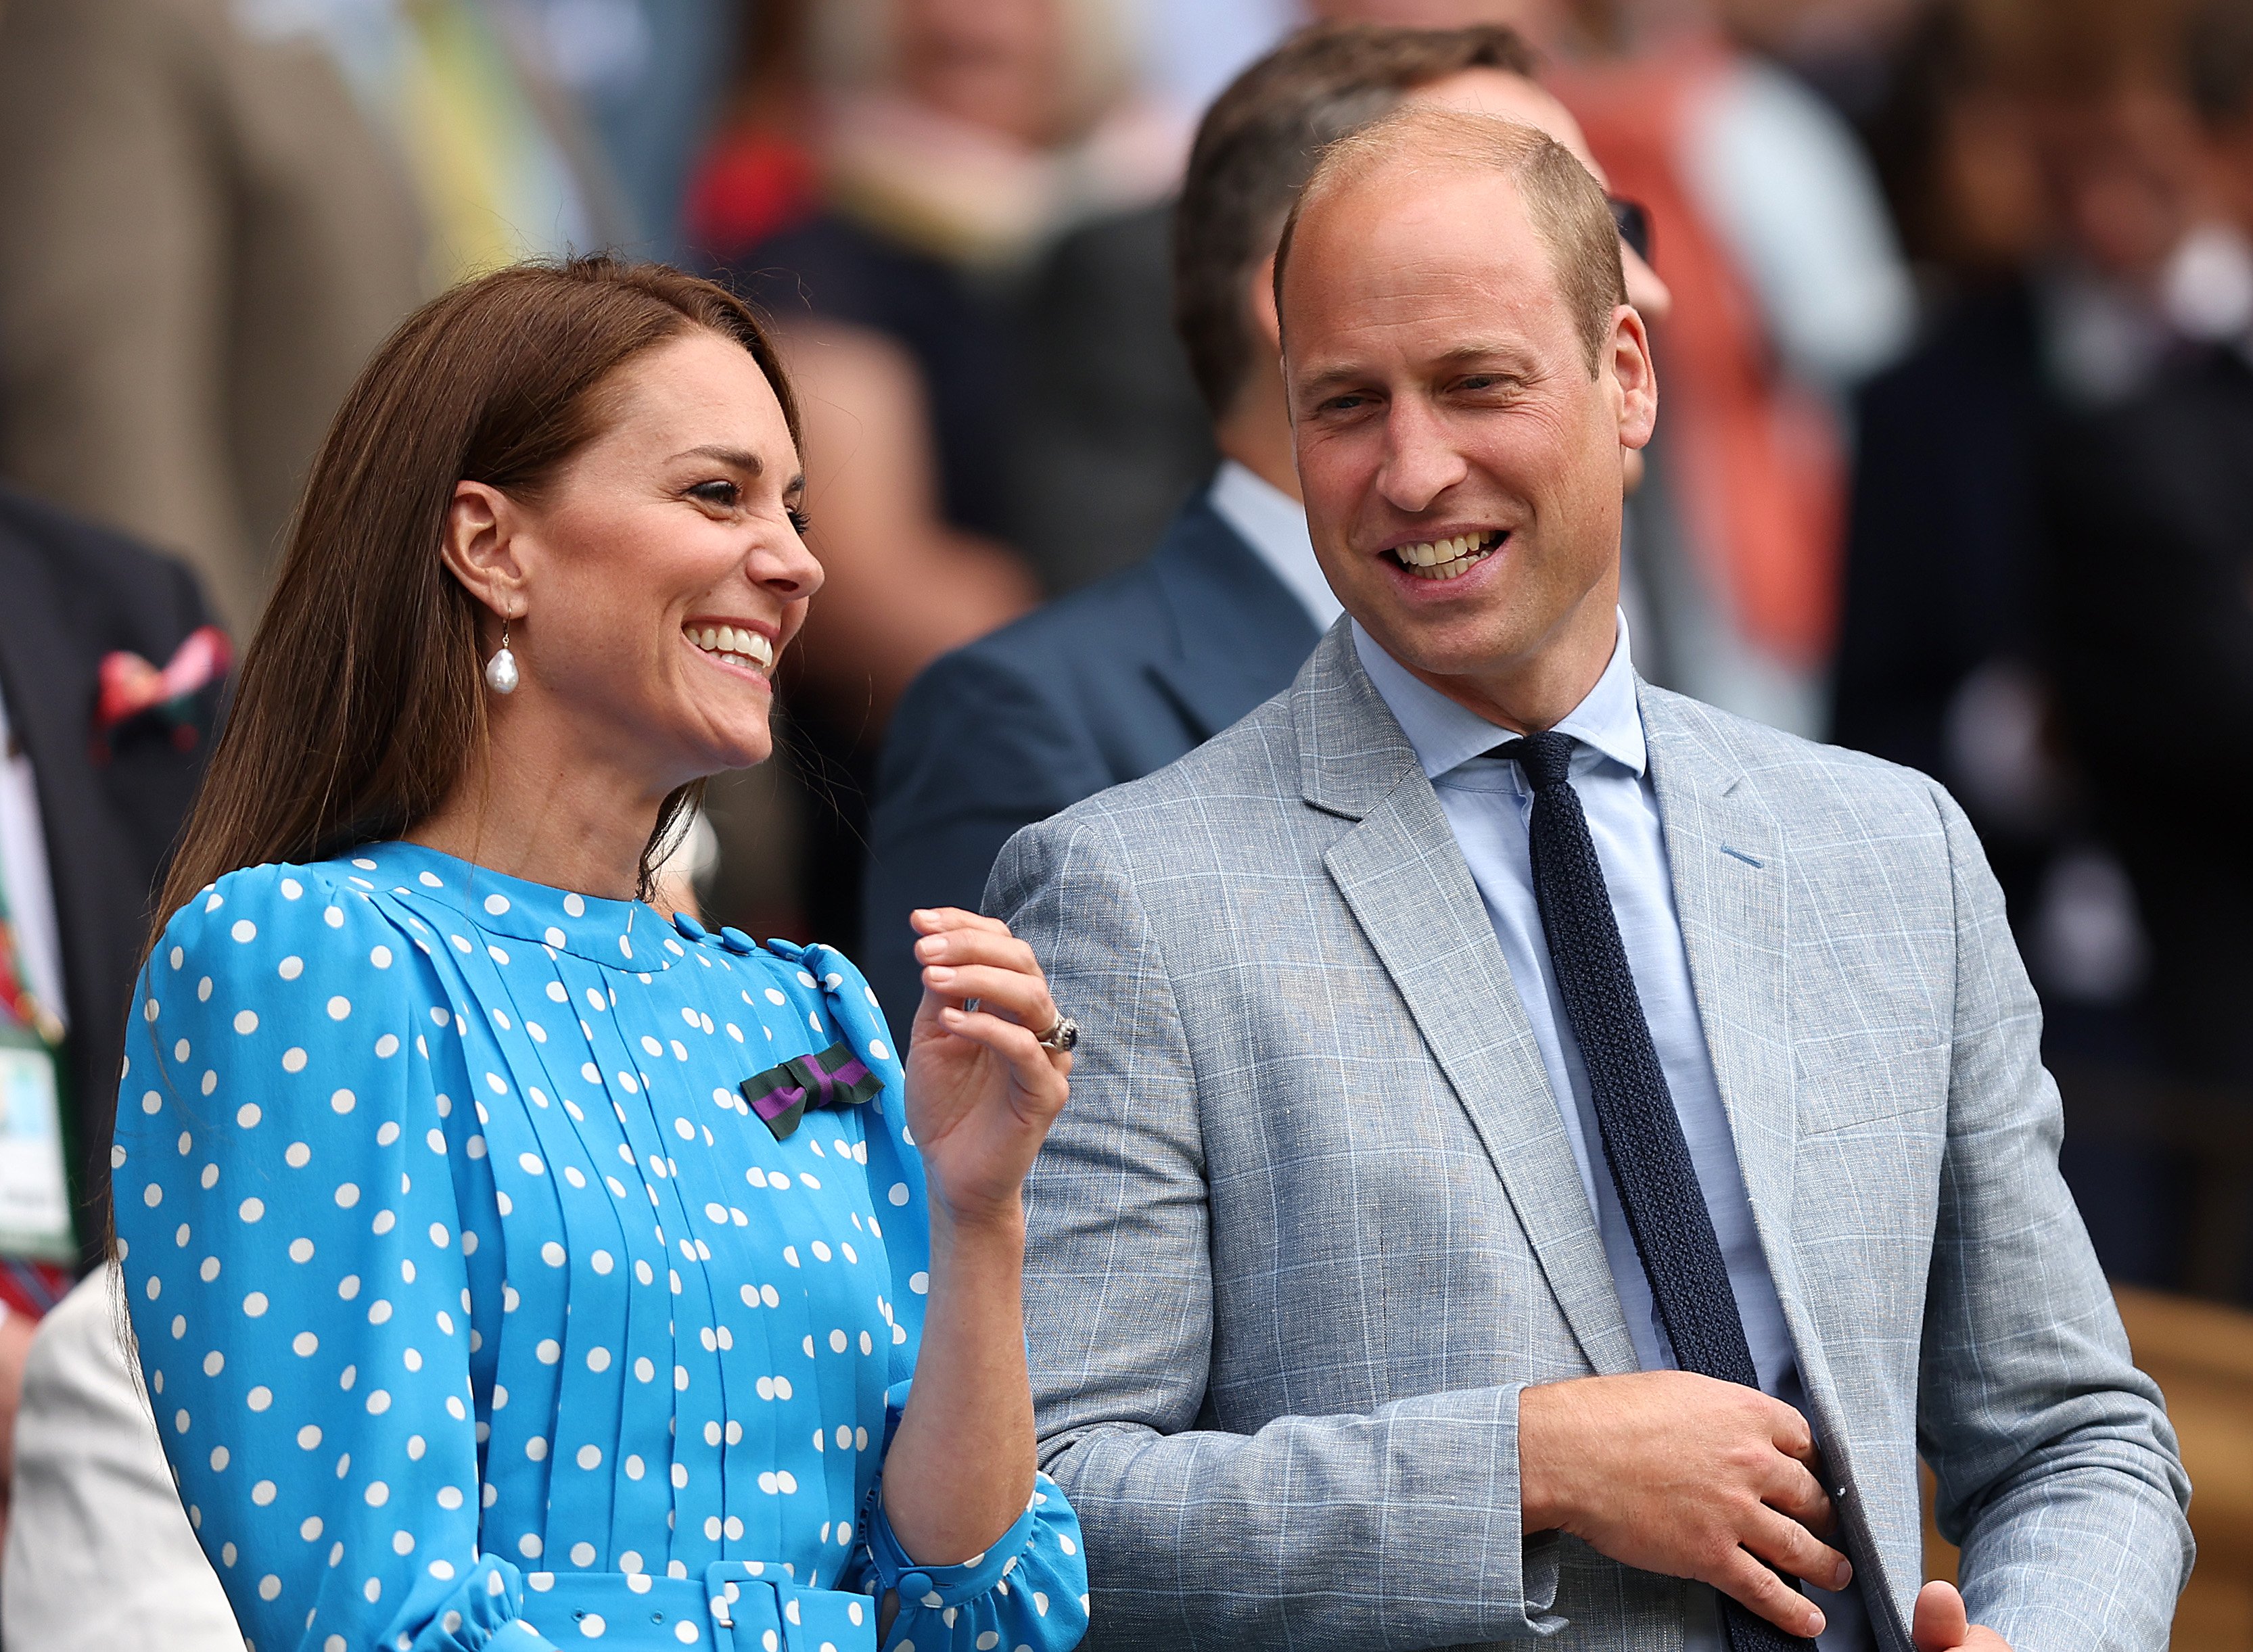 Catherine, Duchess of Cambridge, and Prince William, Duke of Cambridge watch from the Royal Box as Novak Djokovic of Serbia wins against Jannik Sinner of Italy during their Men's Singles Quarter Final match on day nine of The Championships Wimbledon 2022 at All England Lawn Tennis and Croquet Club on July 05, 2022, in London, England. | Source: Getty Images